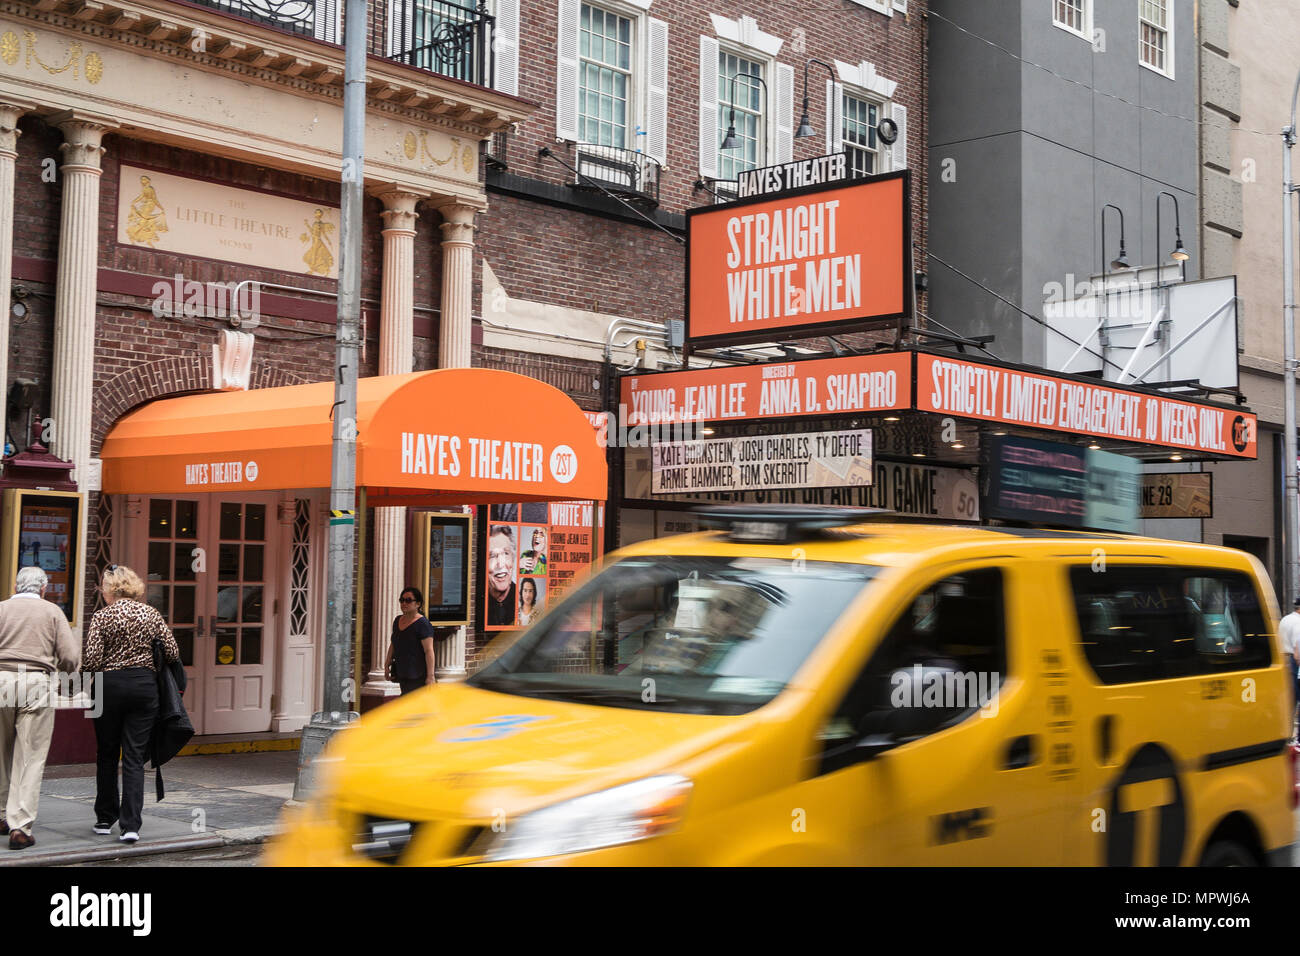 Wenig Theater und Helen Hayes Theatre 240 West 44th Street, Times Square, New York City, USA Stockfoto